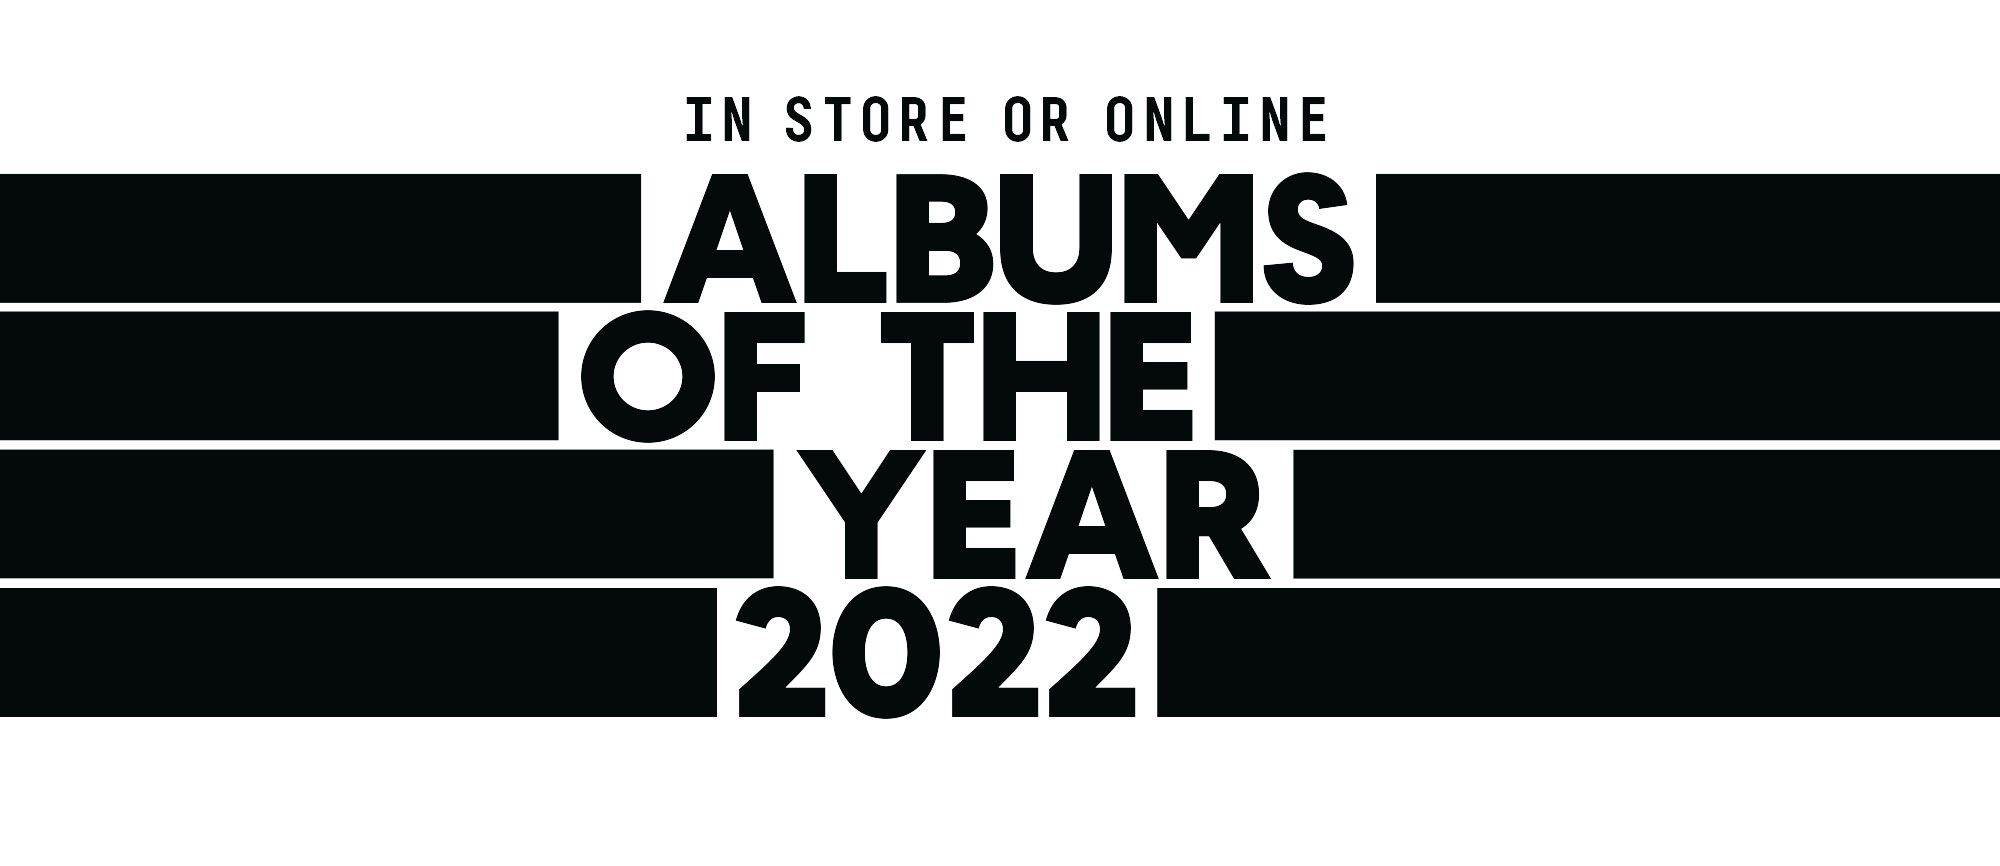 UK Albums of the Year 2022